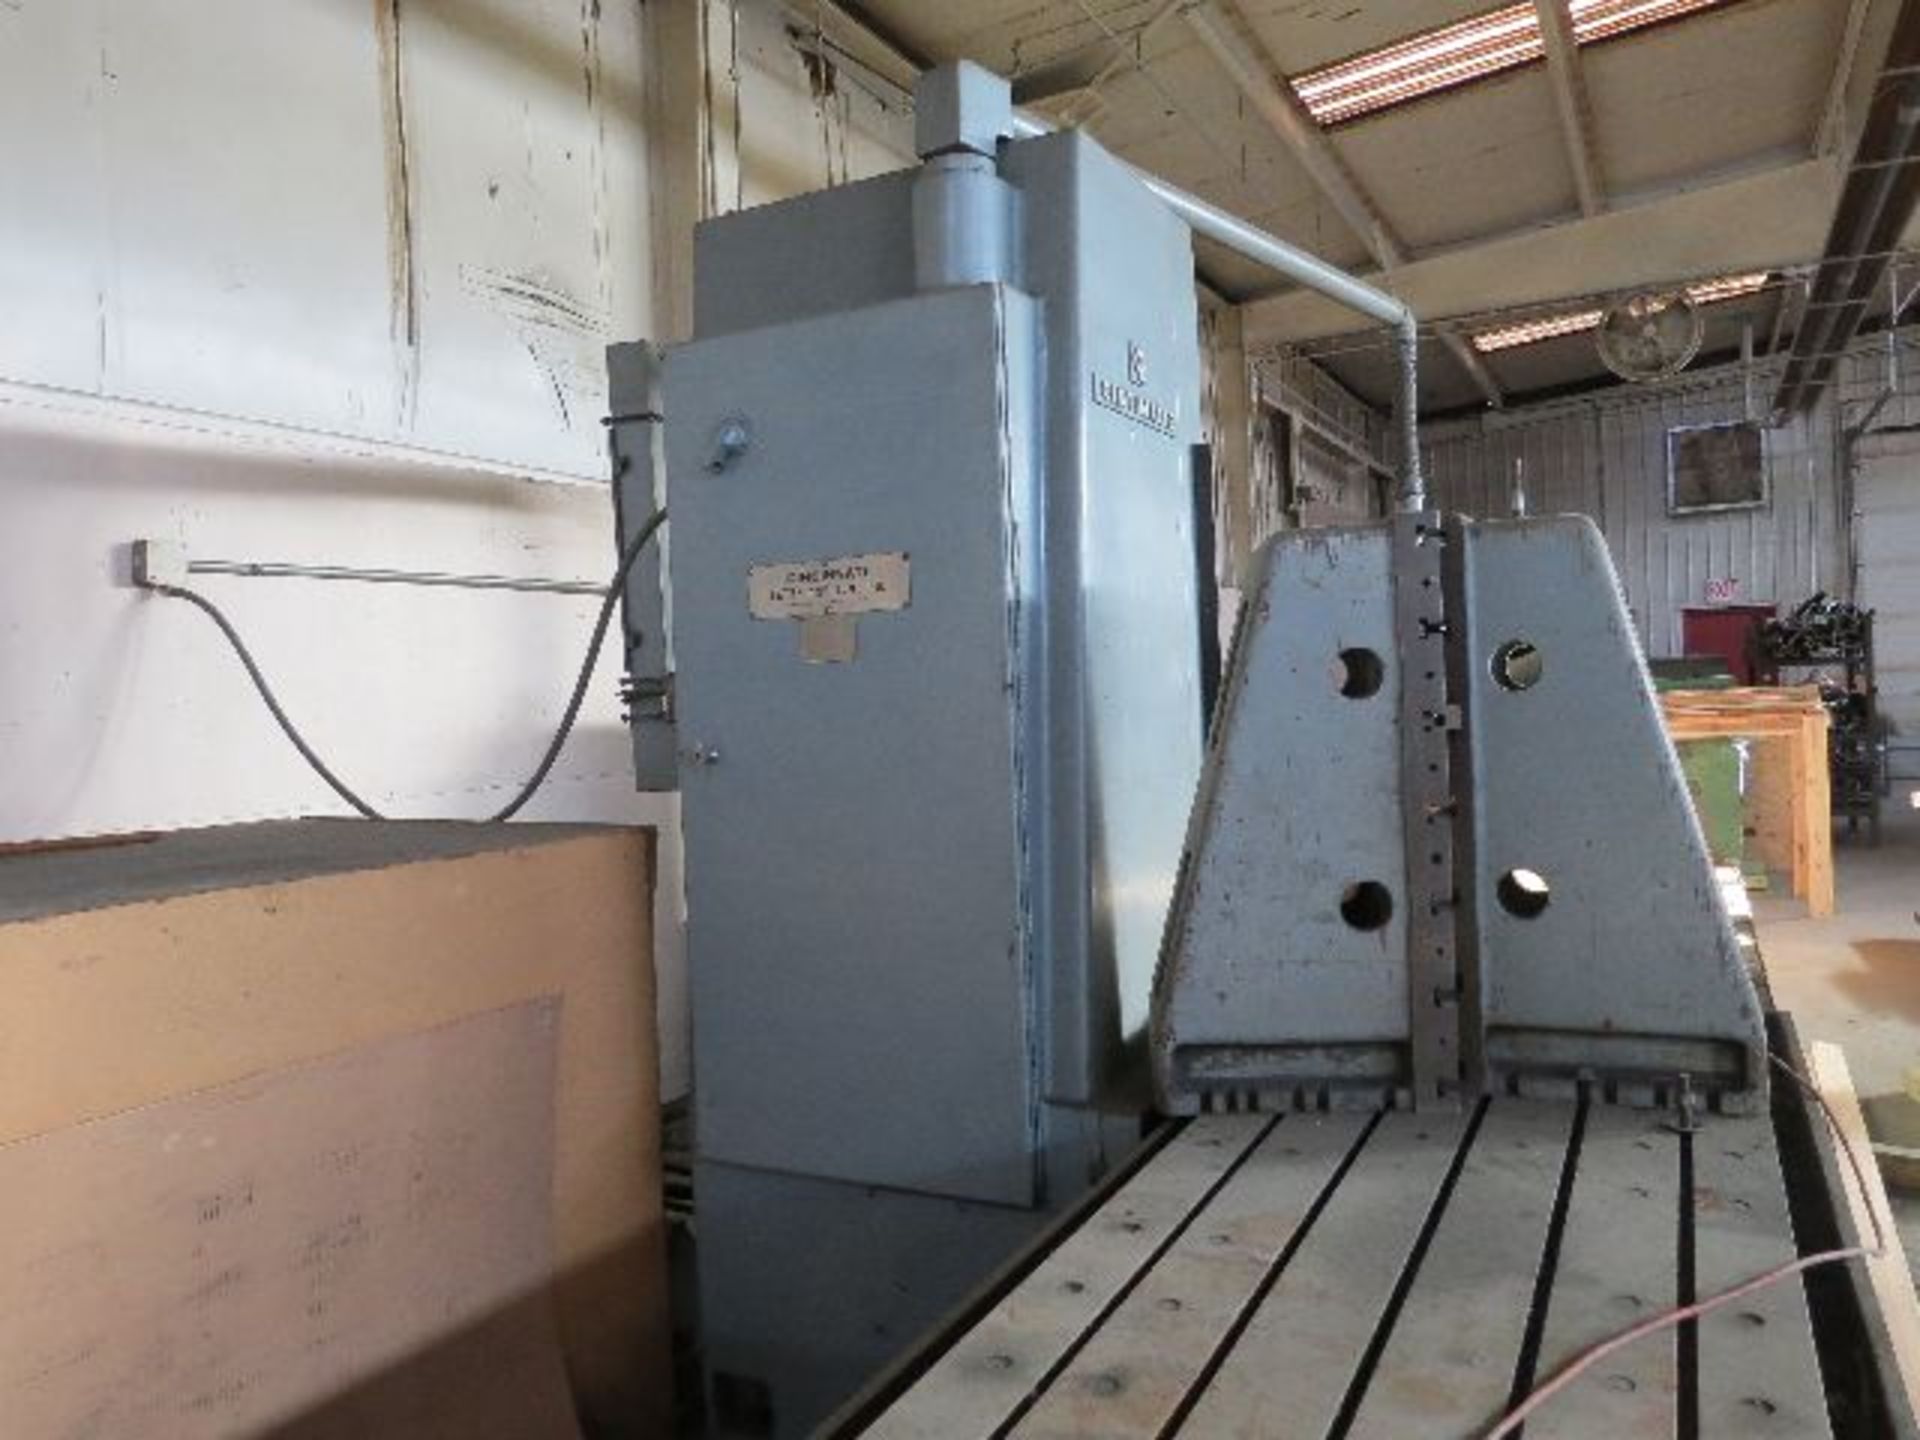 Cintimatic horz.boring mill , 40"x100" travel. S/N 55131H55H-0005.  Location - Waterloo, IA - Image 7 of 10